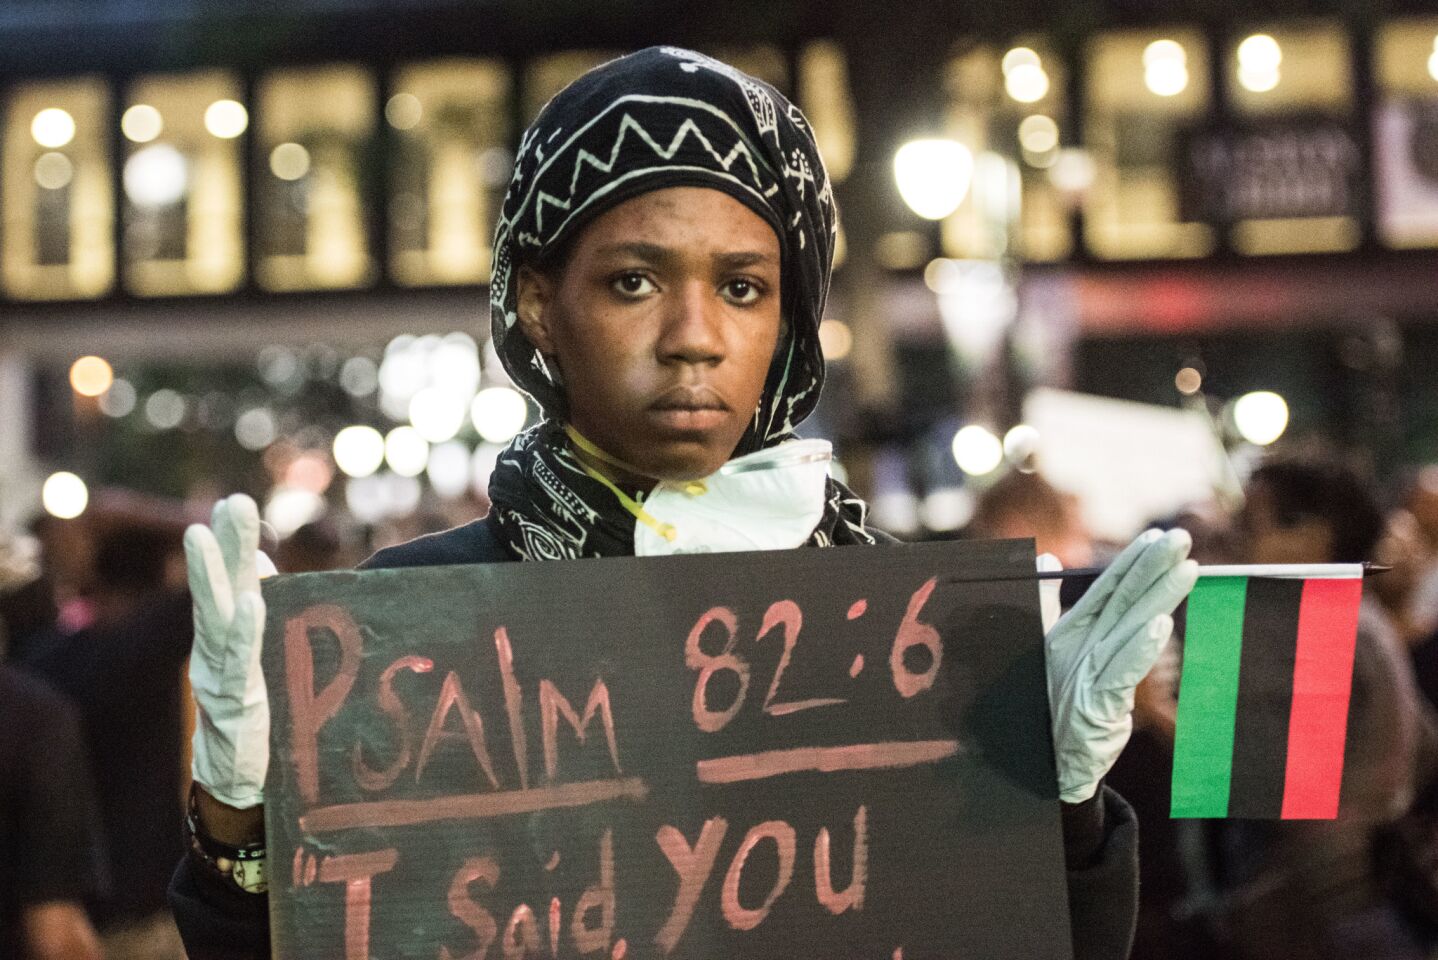 A protester with a biblical message.